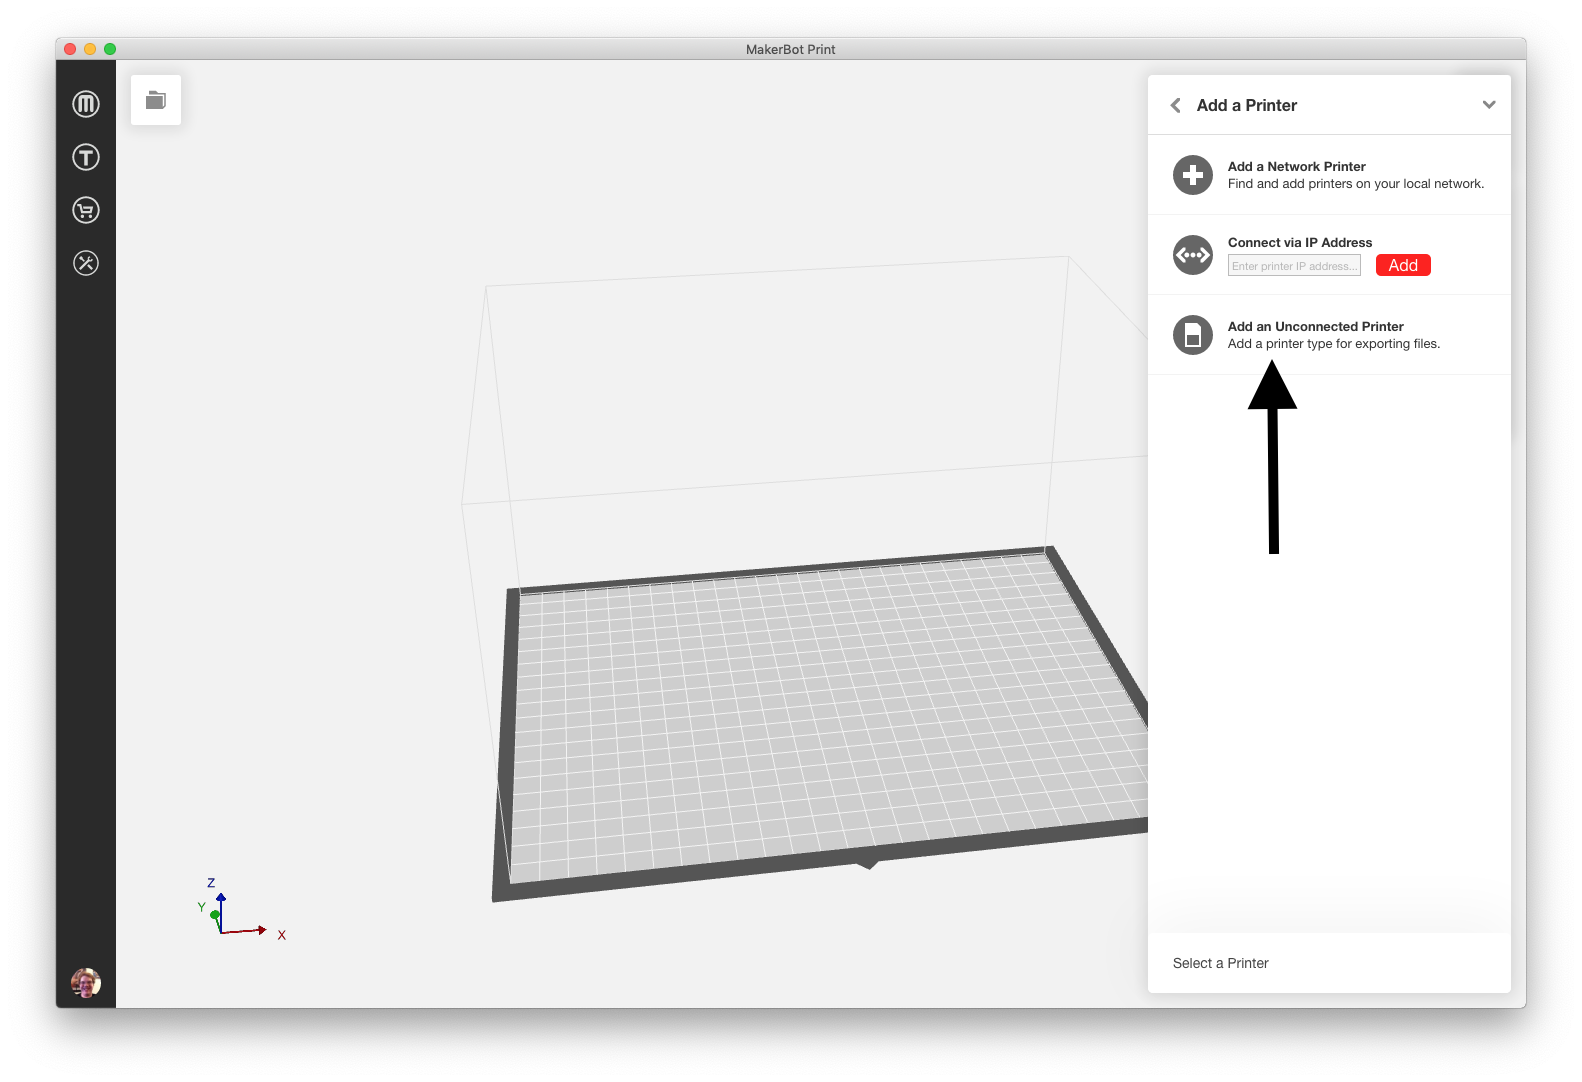 Screenshot of the MakerBot Print Application with an arrow poitning to the option "Add an Unconnected Printer"